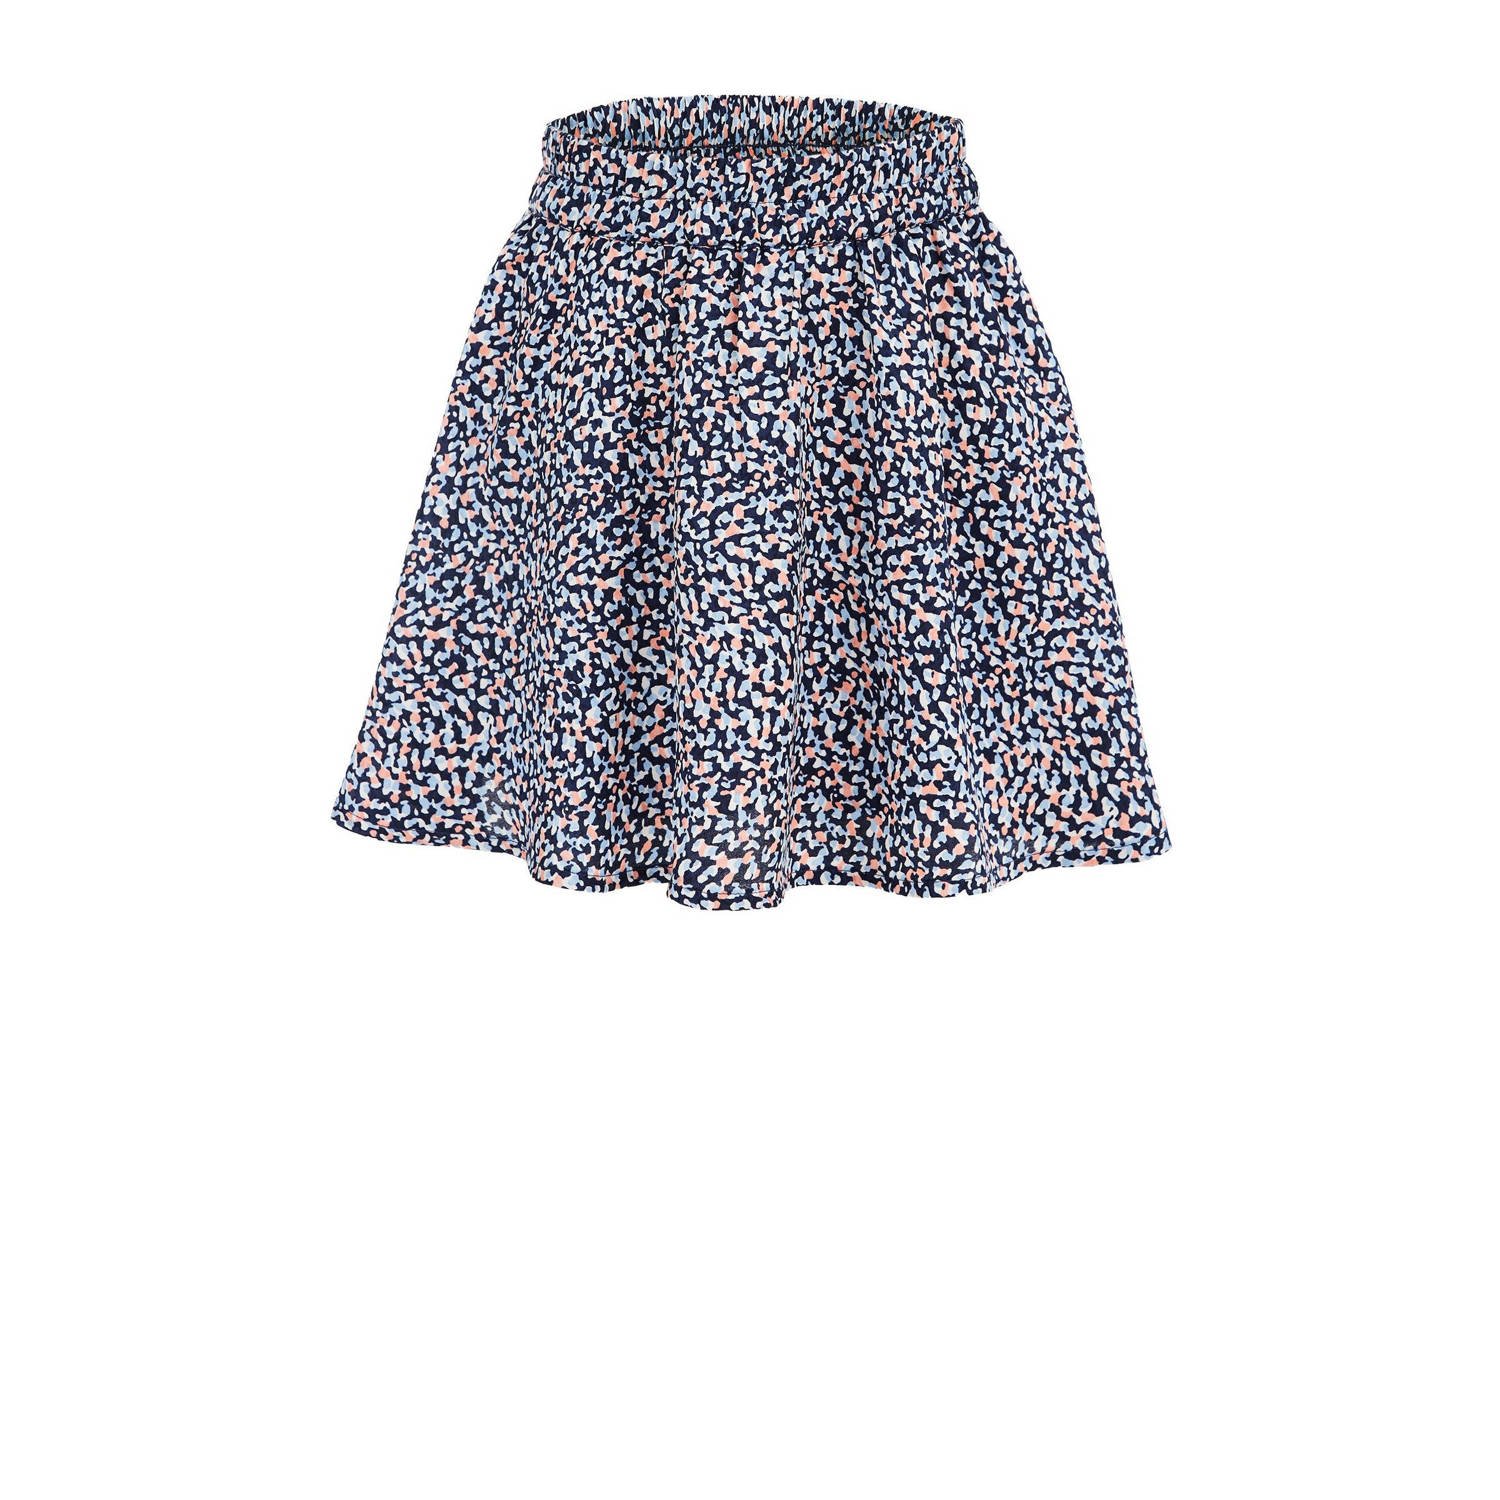 WE Fashion rok met all over print donkerblauw